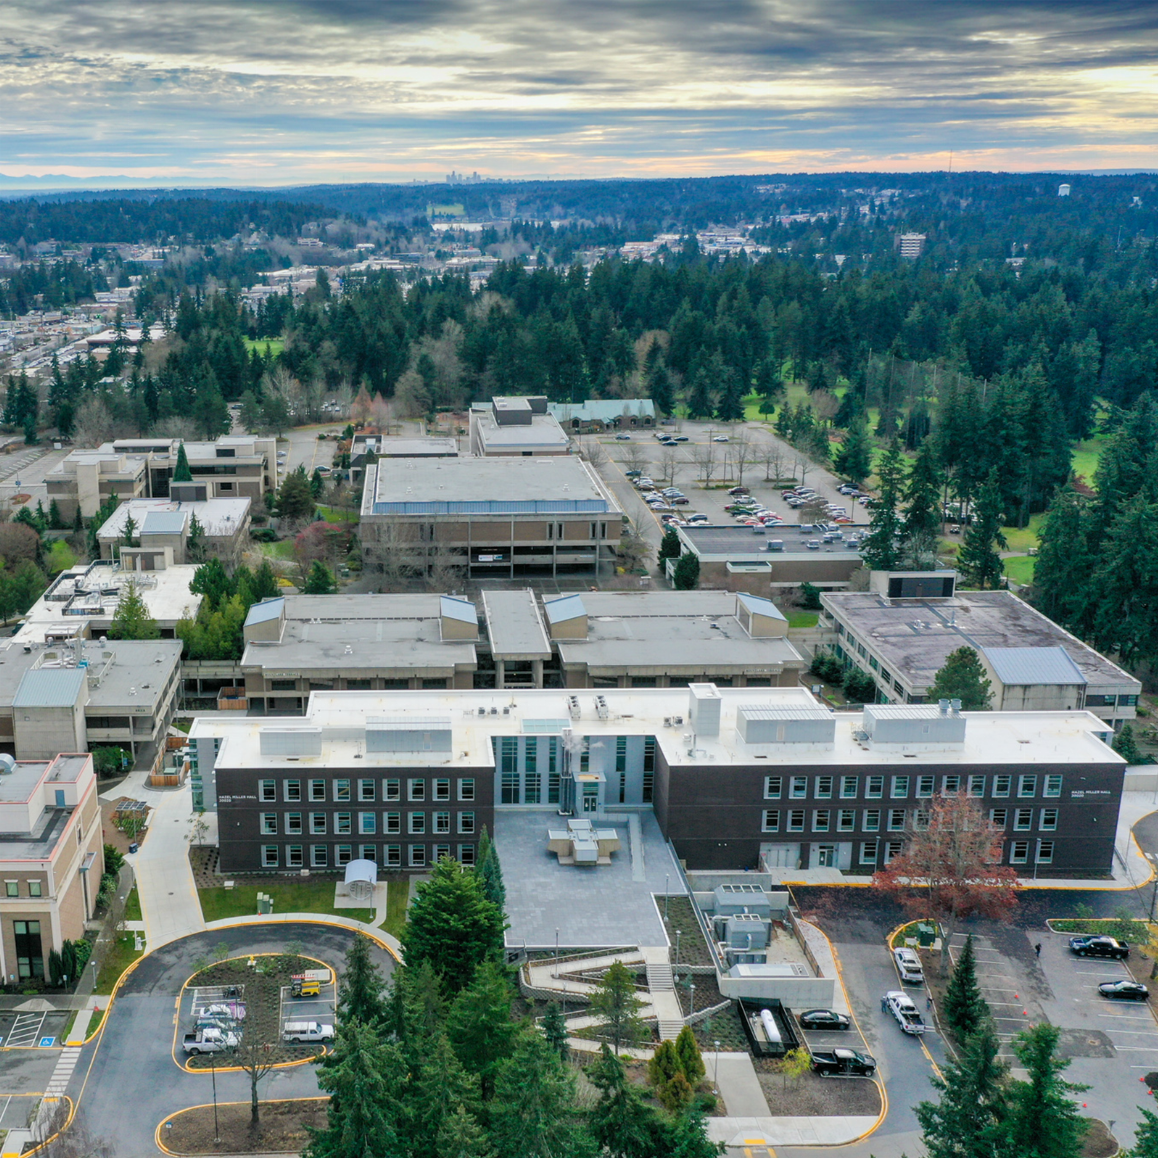 Edmonds College is one of two colleges on the West Coast to receive an AI Incubator Network grant.